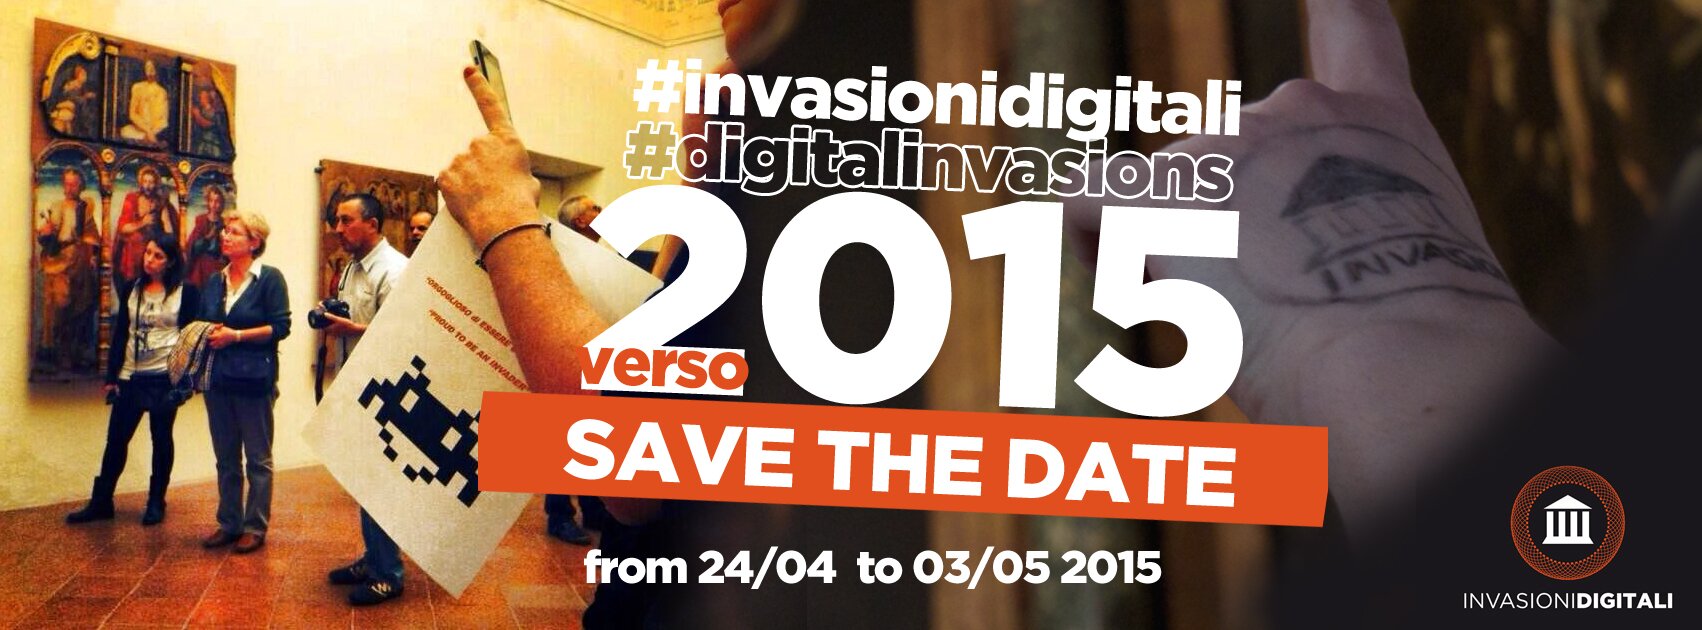 Save the date invasion_0